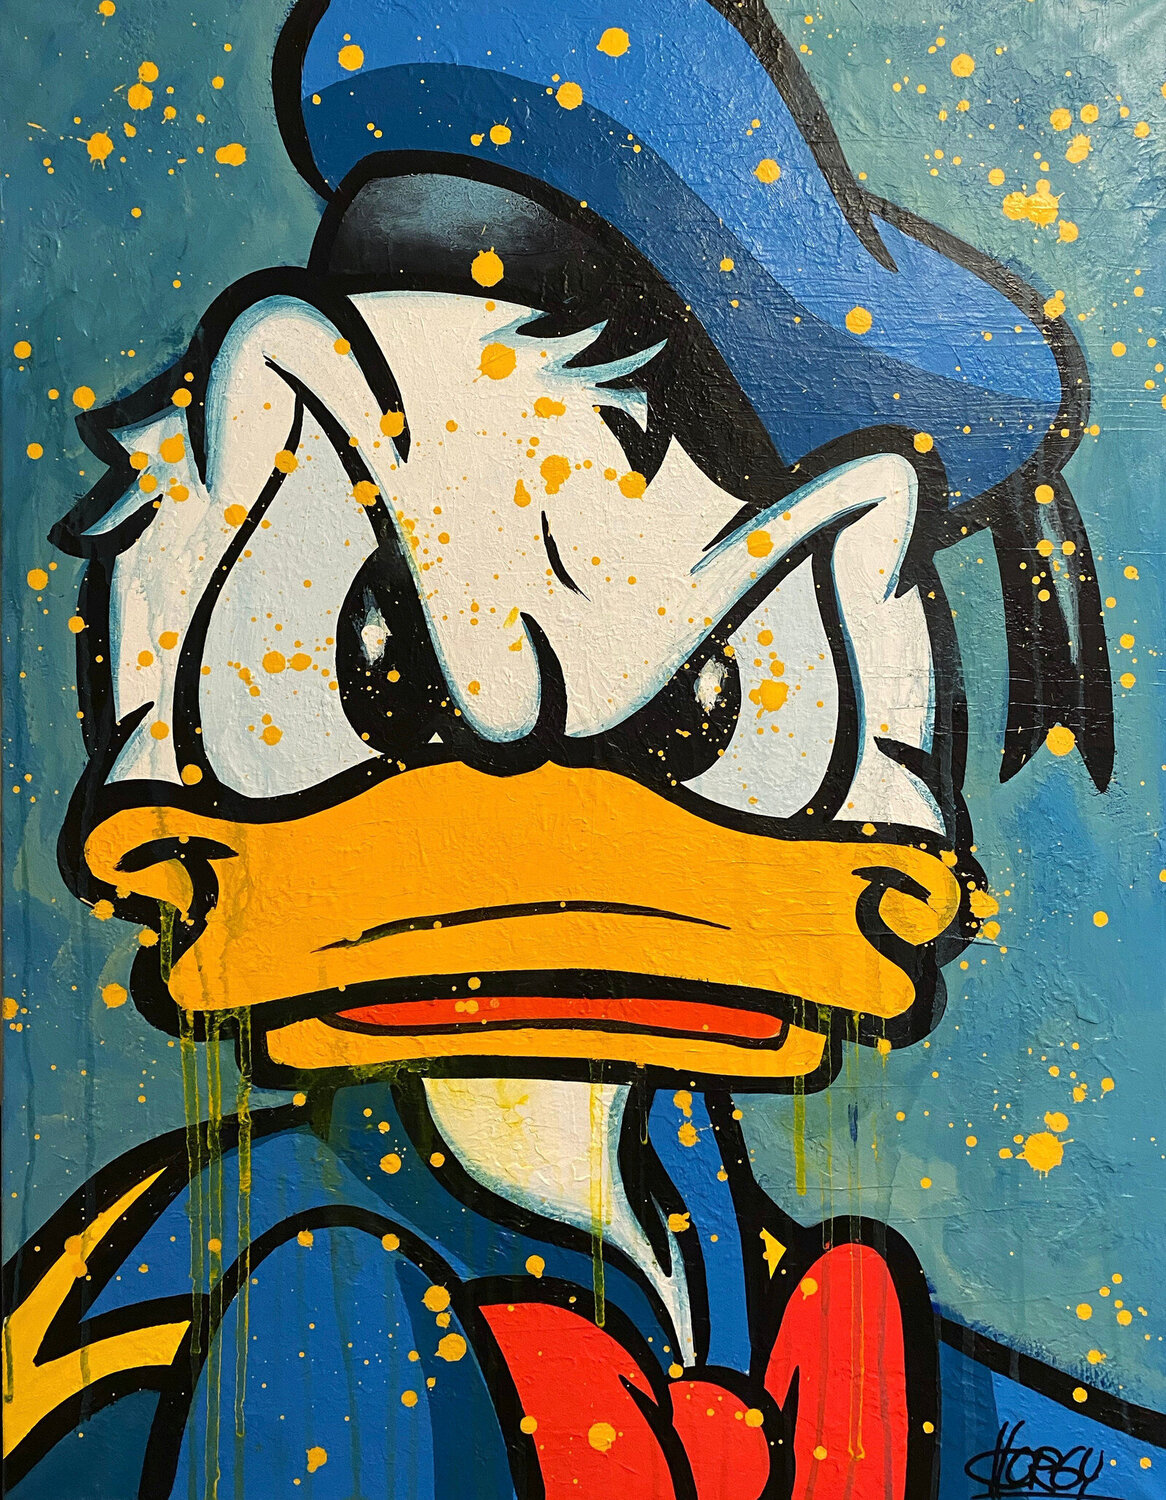 Pissed Off» feat. Donald Duck (Disney) by CHORGY (2022) : Painting ...